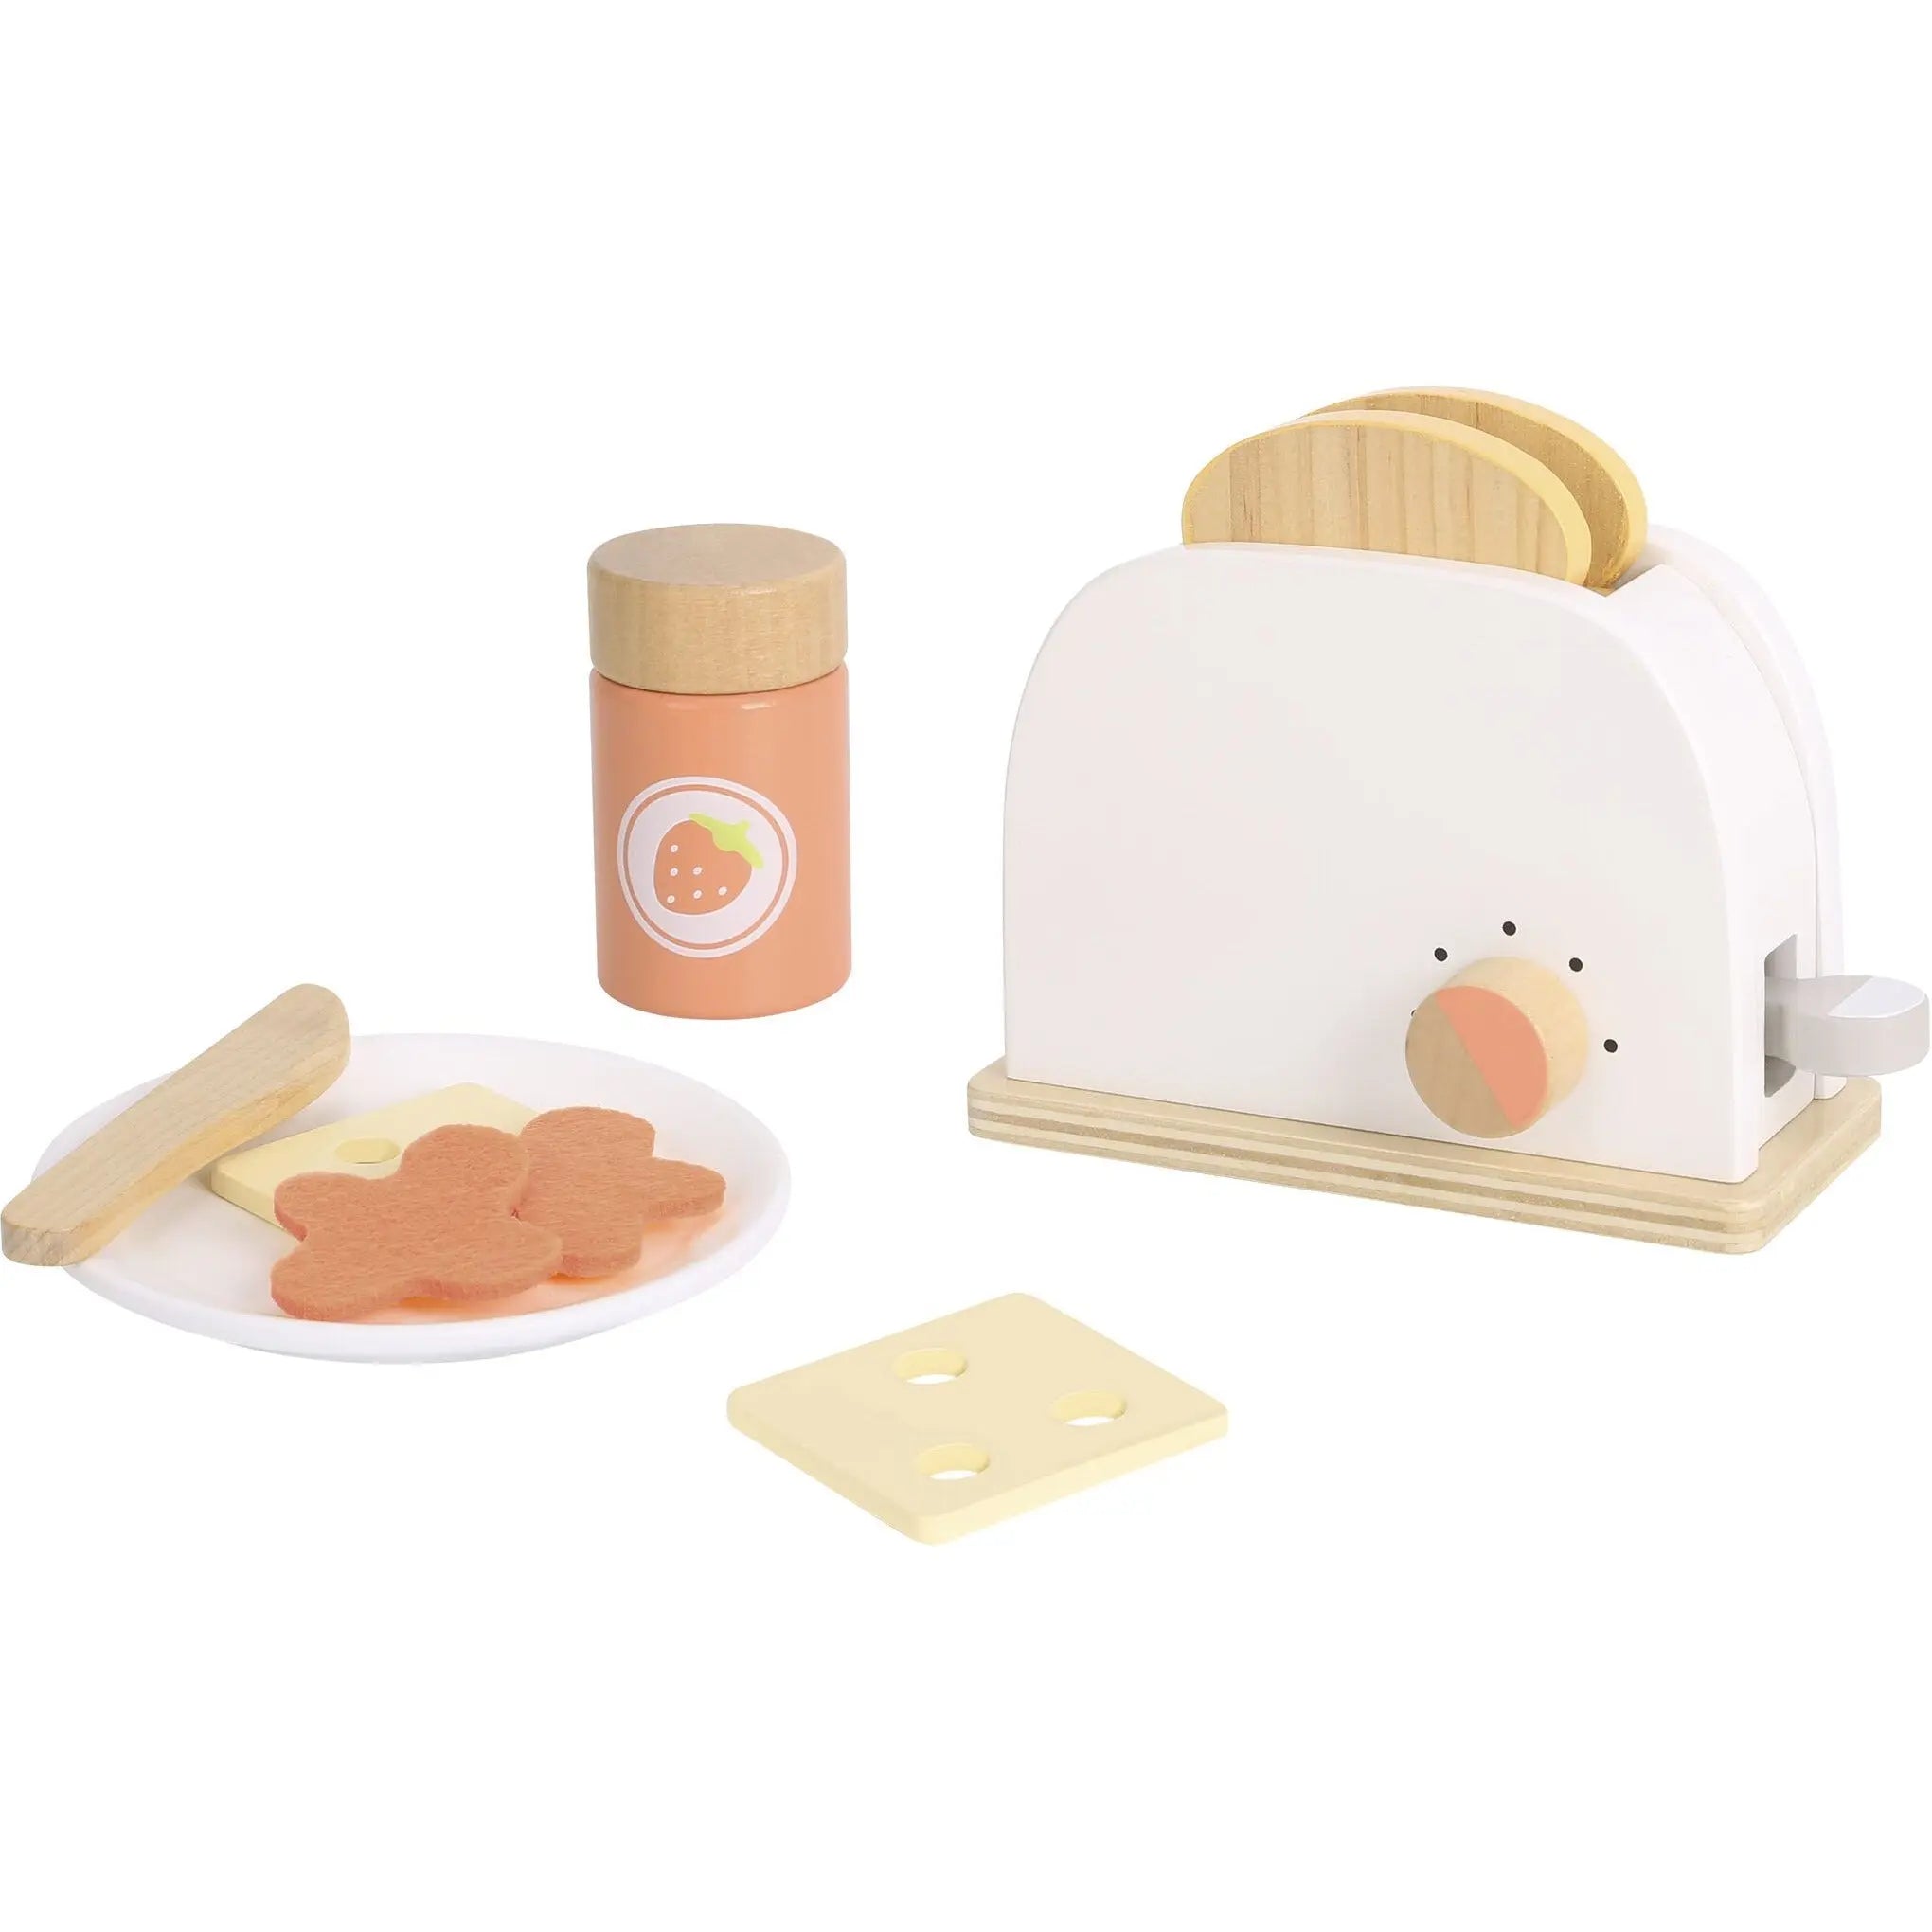 Tooky Toy Wooden Toaster Set Tooky Toy